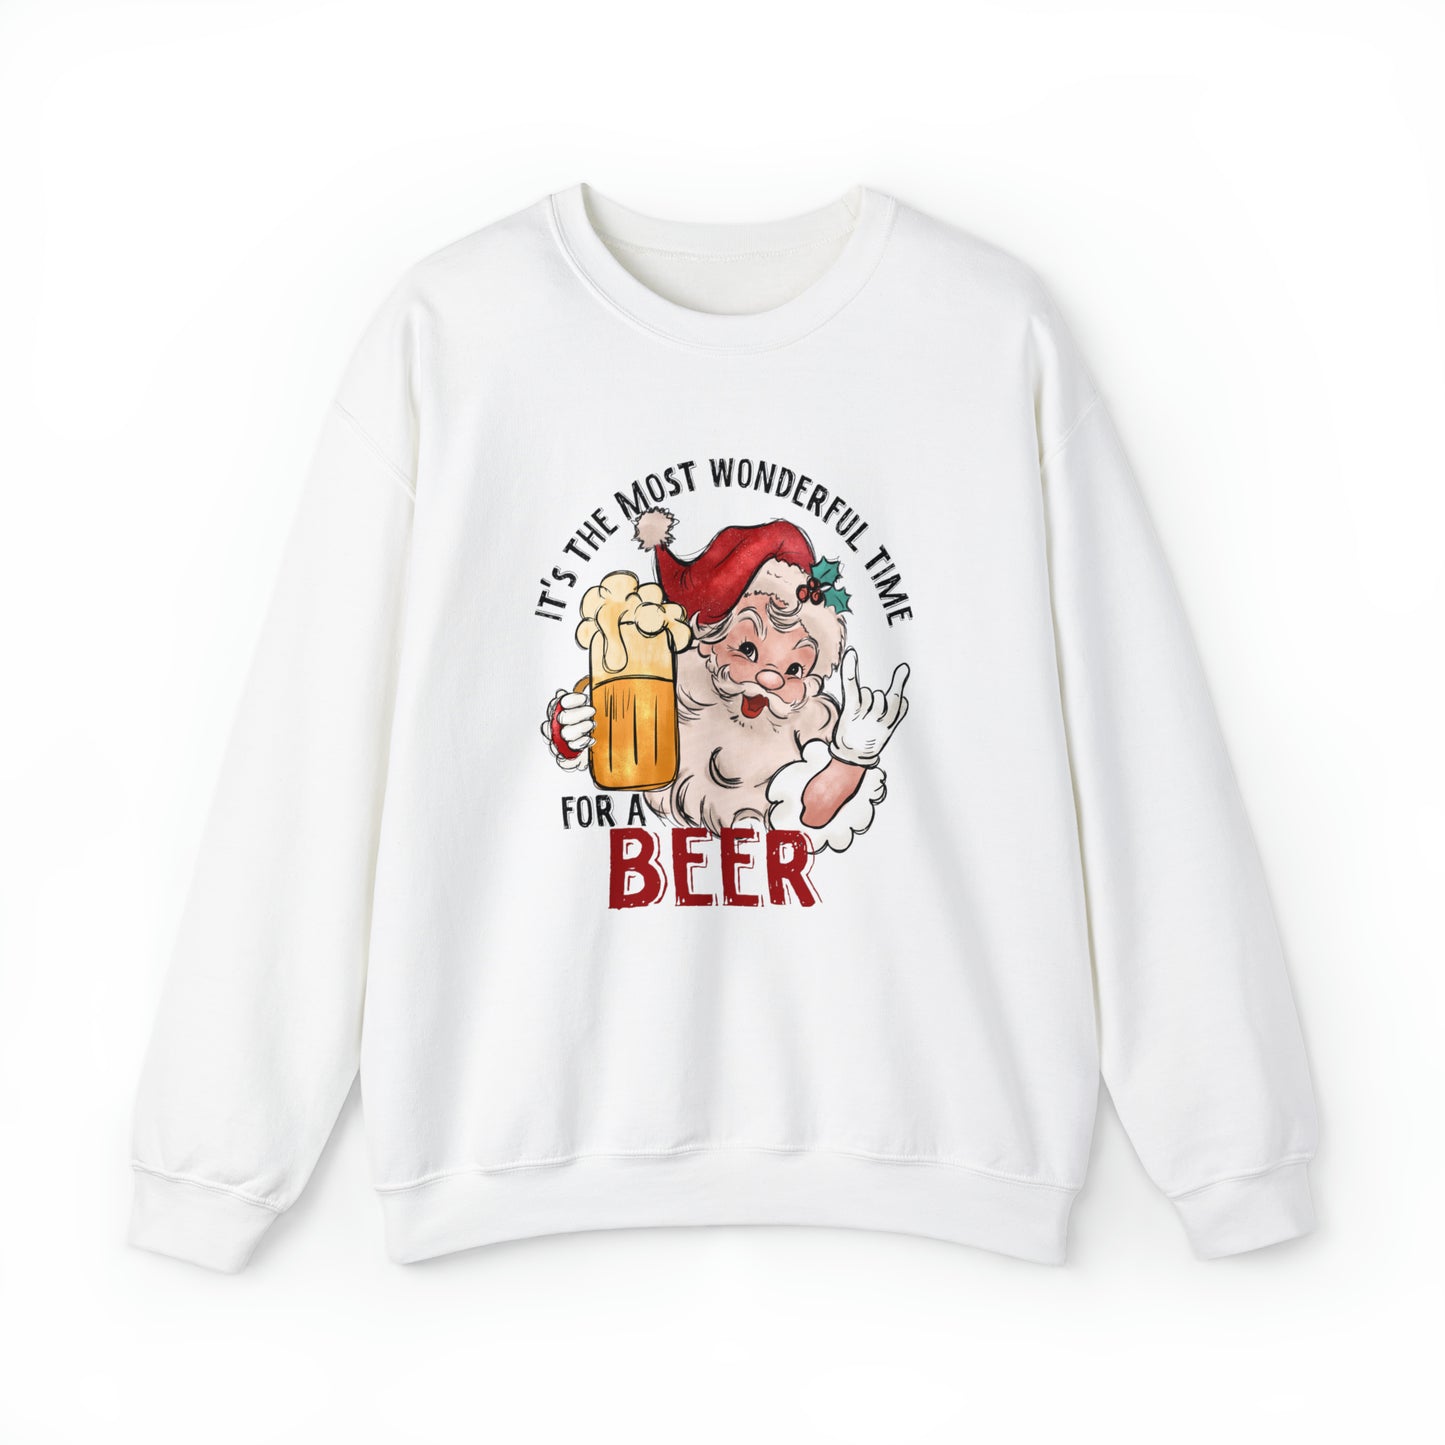 It's the most wonderful Time For a Beer Christmas Sweatshirt| Funny Santa Christmas Sweater